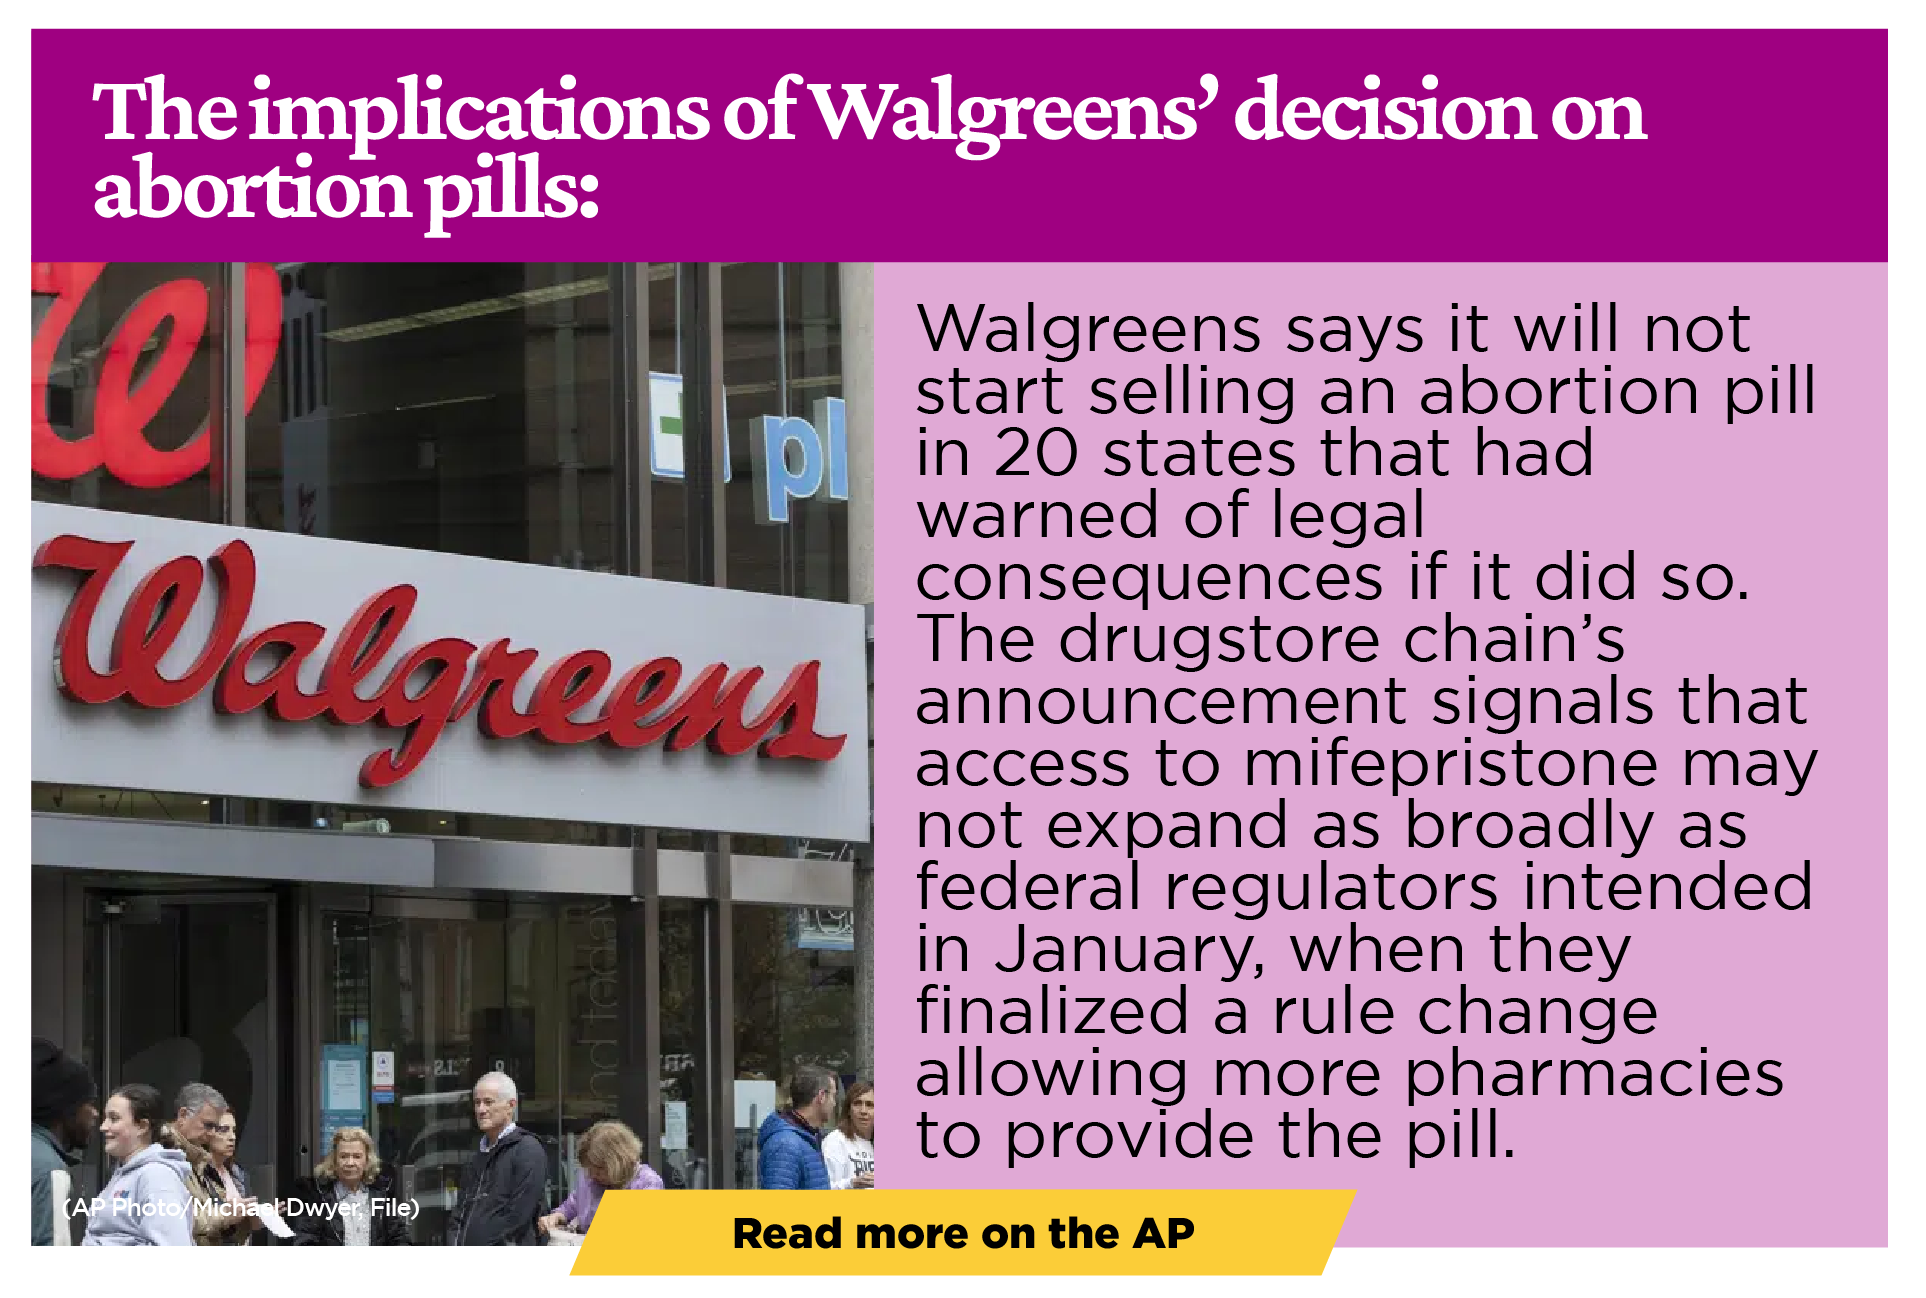 The implications of Walgreens’ decision on abortion pills: Walgreens says it will not start selling an abortion pill in 20 states that had warned of legal consequences if it did so. The drugstore chain’s announcement signals that access to mifepristone may not expand as broadly as federal regulators intended in January, when they finalized a rule change allowing more pharmacies to provide the pill.